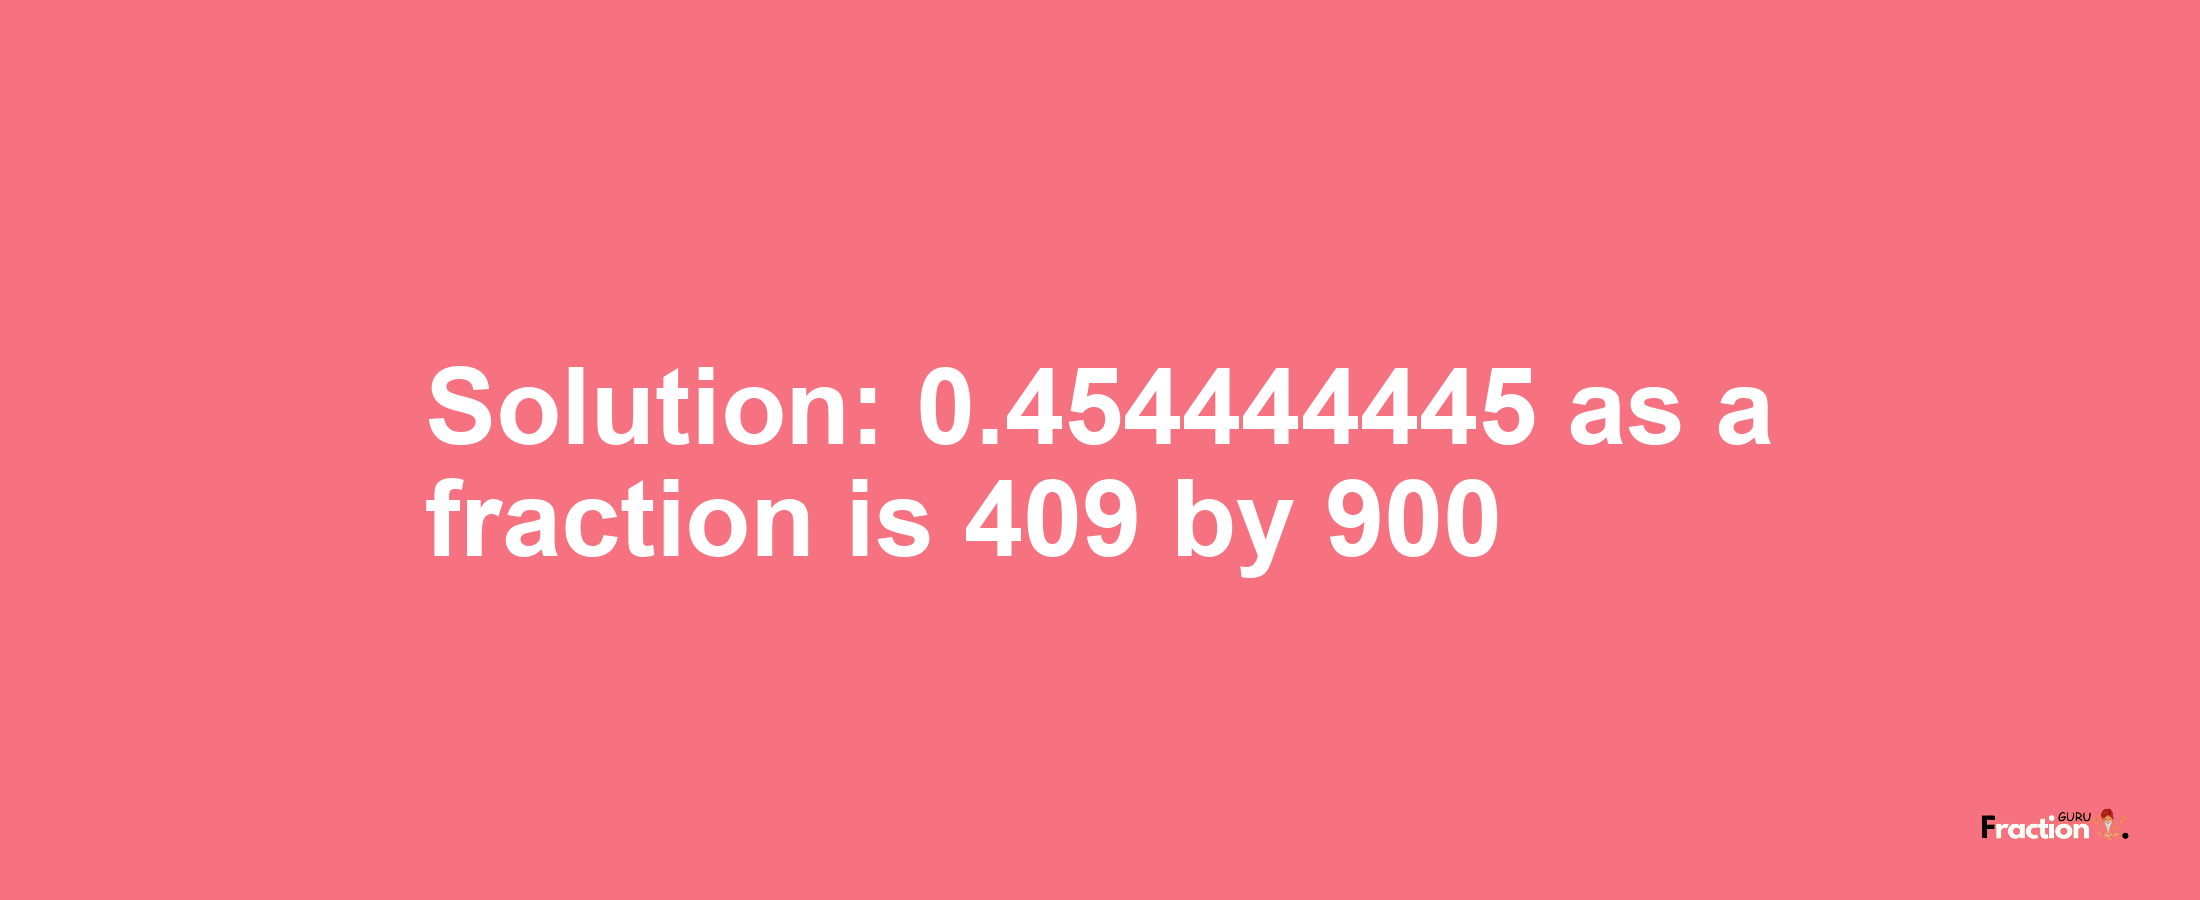 Solution:0.454444445 as a fraction is 409/900